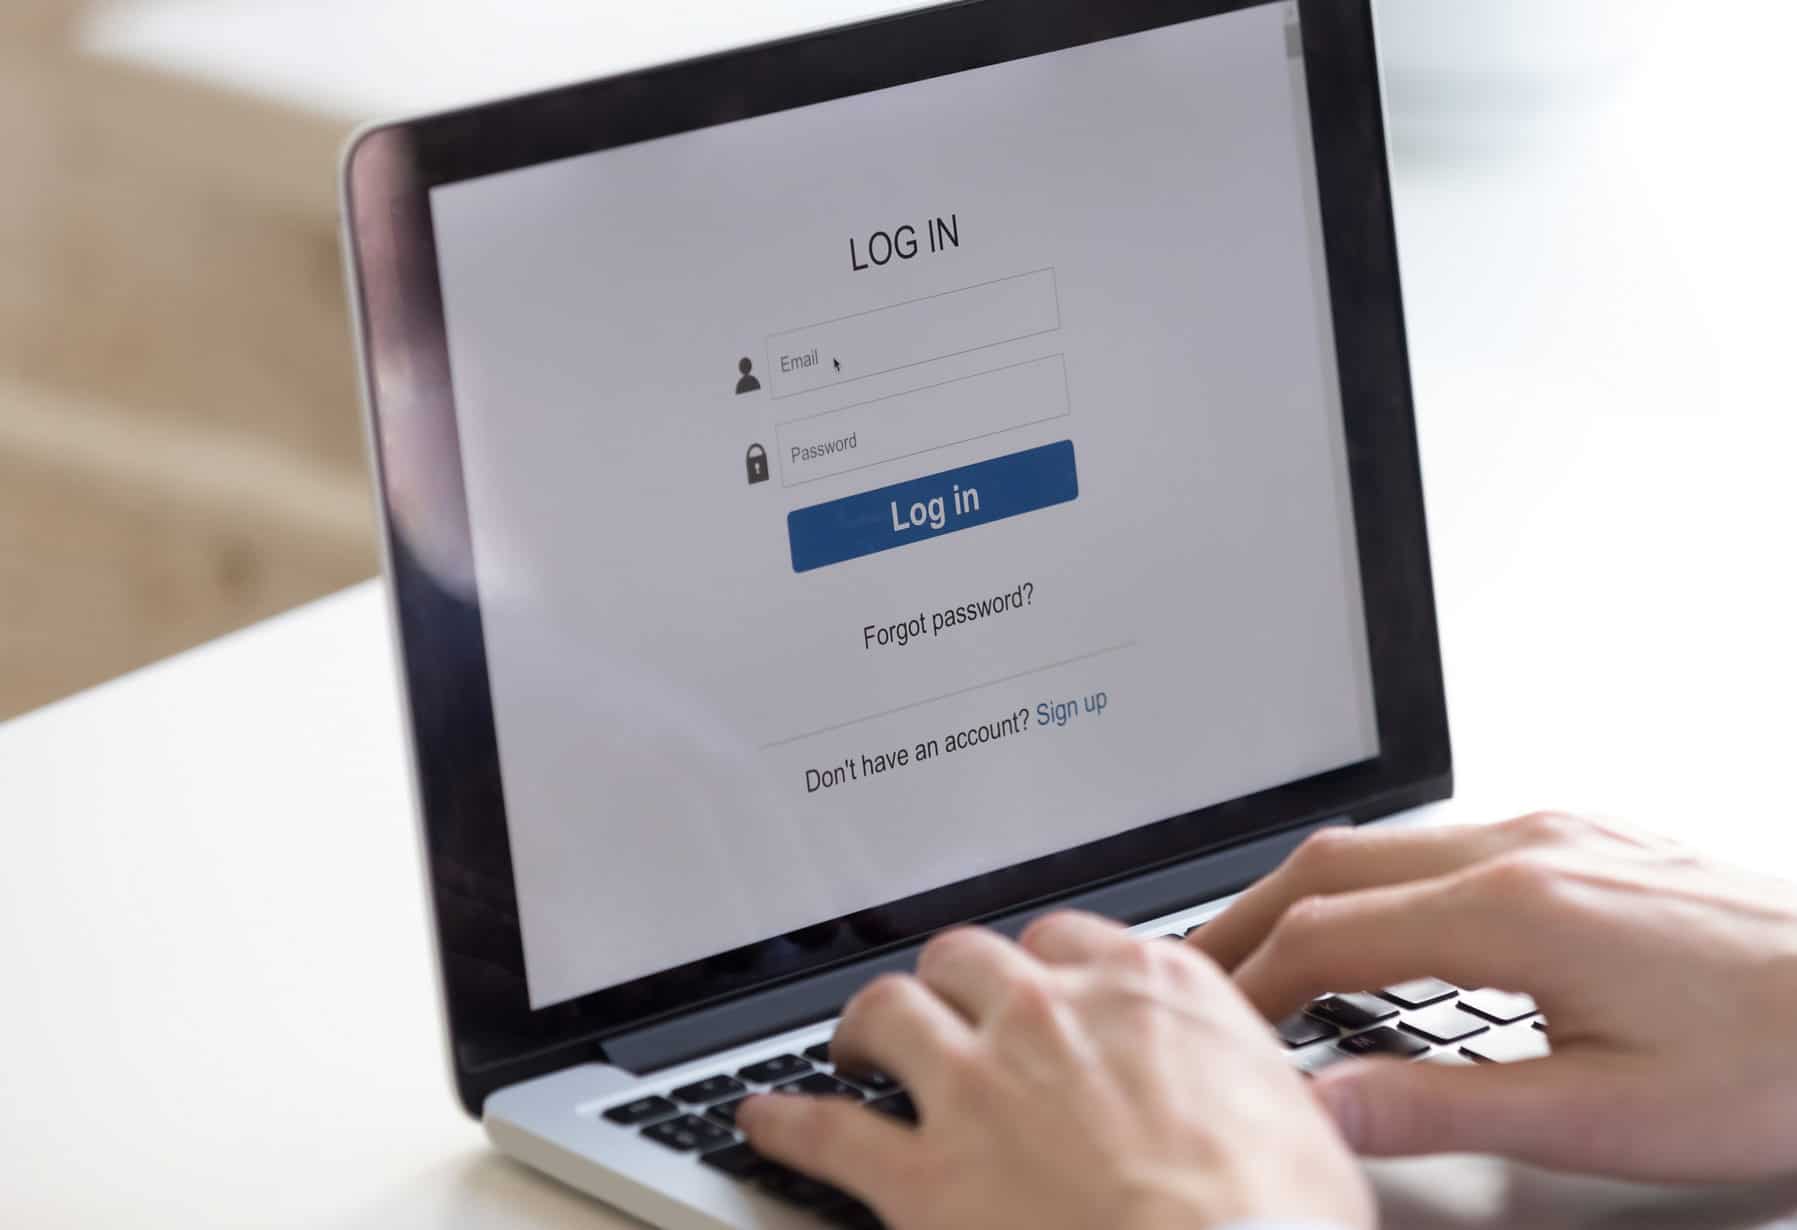 What Do I Need To Know About Logins For My Business Technology?